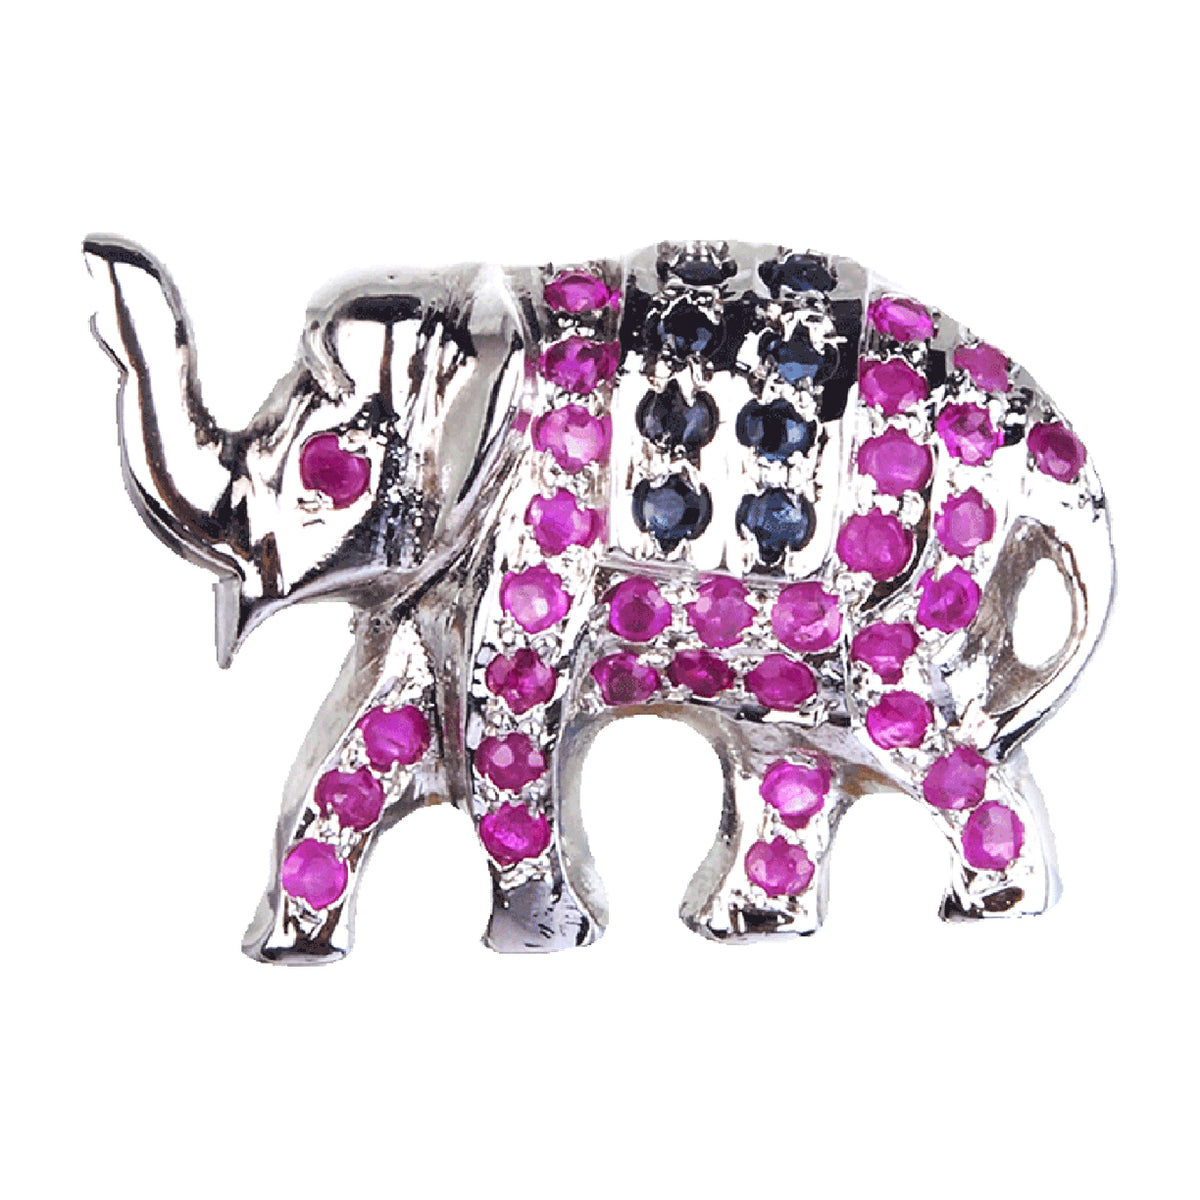 Silver Pendant/Brooch with Blue Sapphire and Ruby Elephant,  long earrings, small earrings, hoops, drops, danglers, studs, stud earrings, Handcuff, Red onyx, Black onyx, Silver Necklaces, Buy jewellery online, Earrings, Rings, Bangles, Pendants, And Ankle